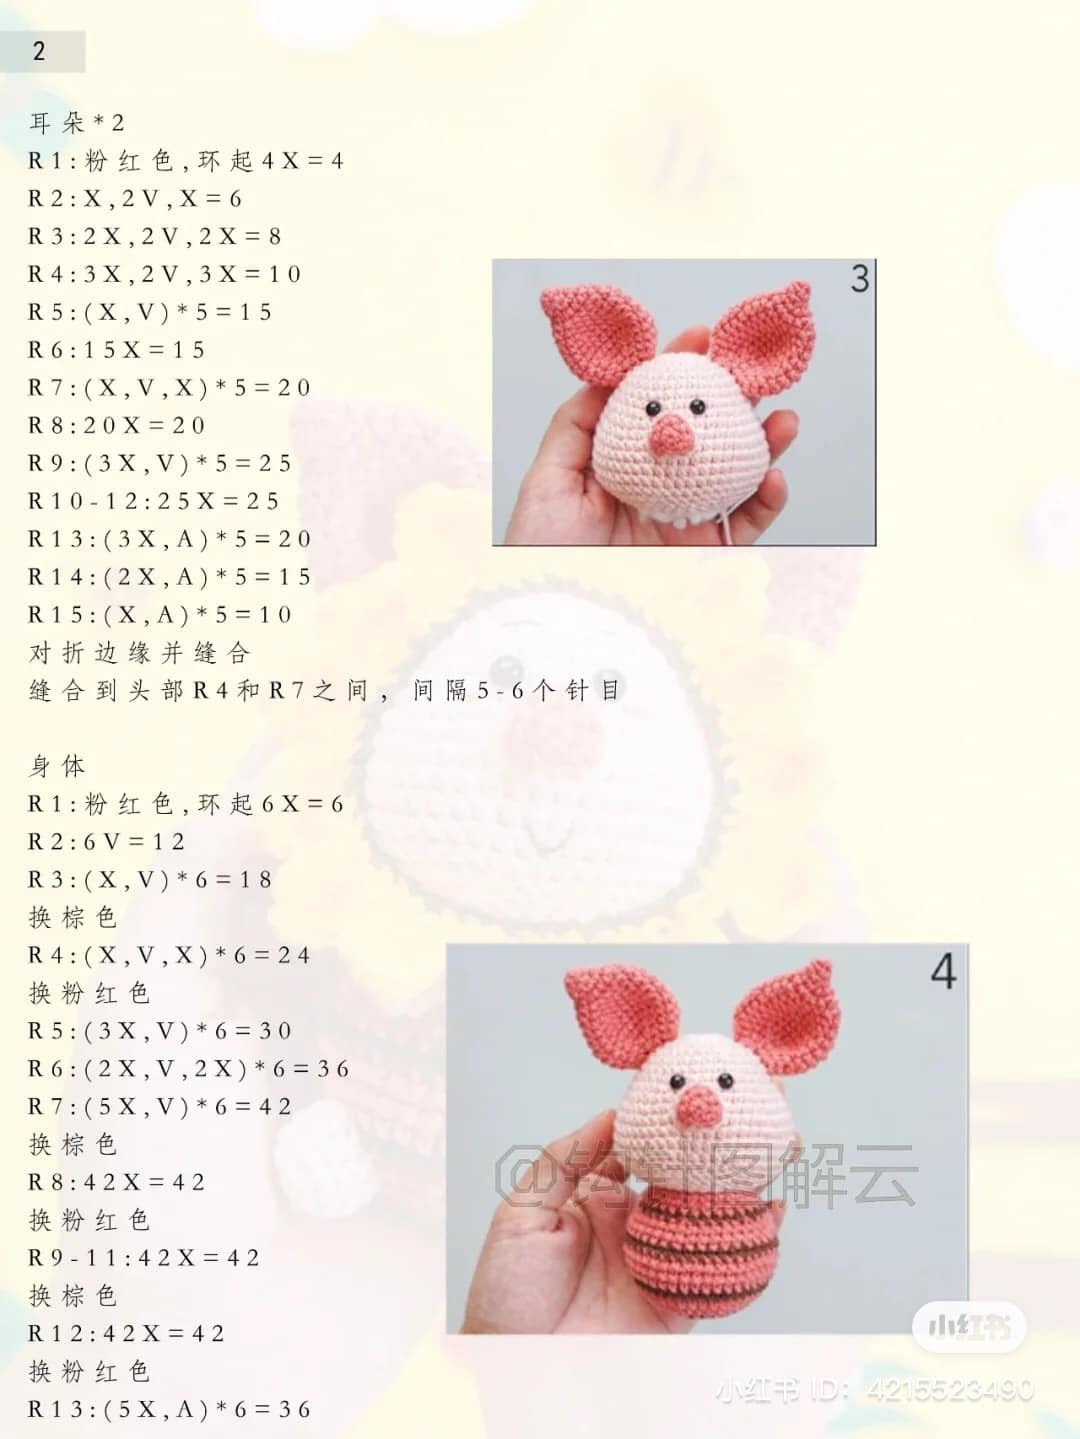 crochet pattern baby goat, baby tiger, baby pig, baby bee.